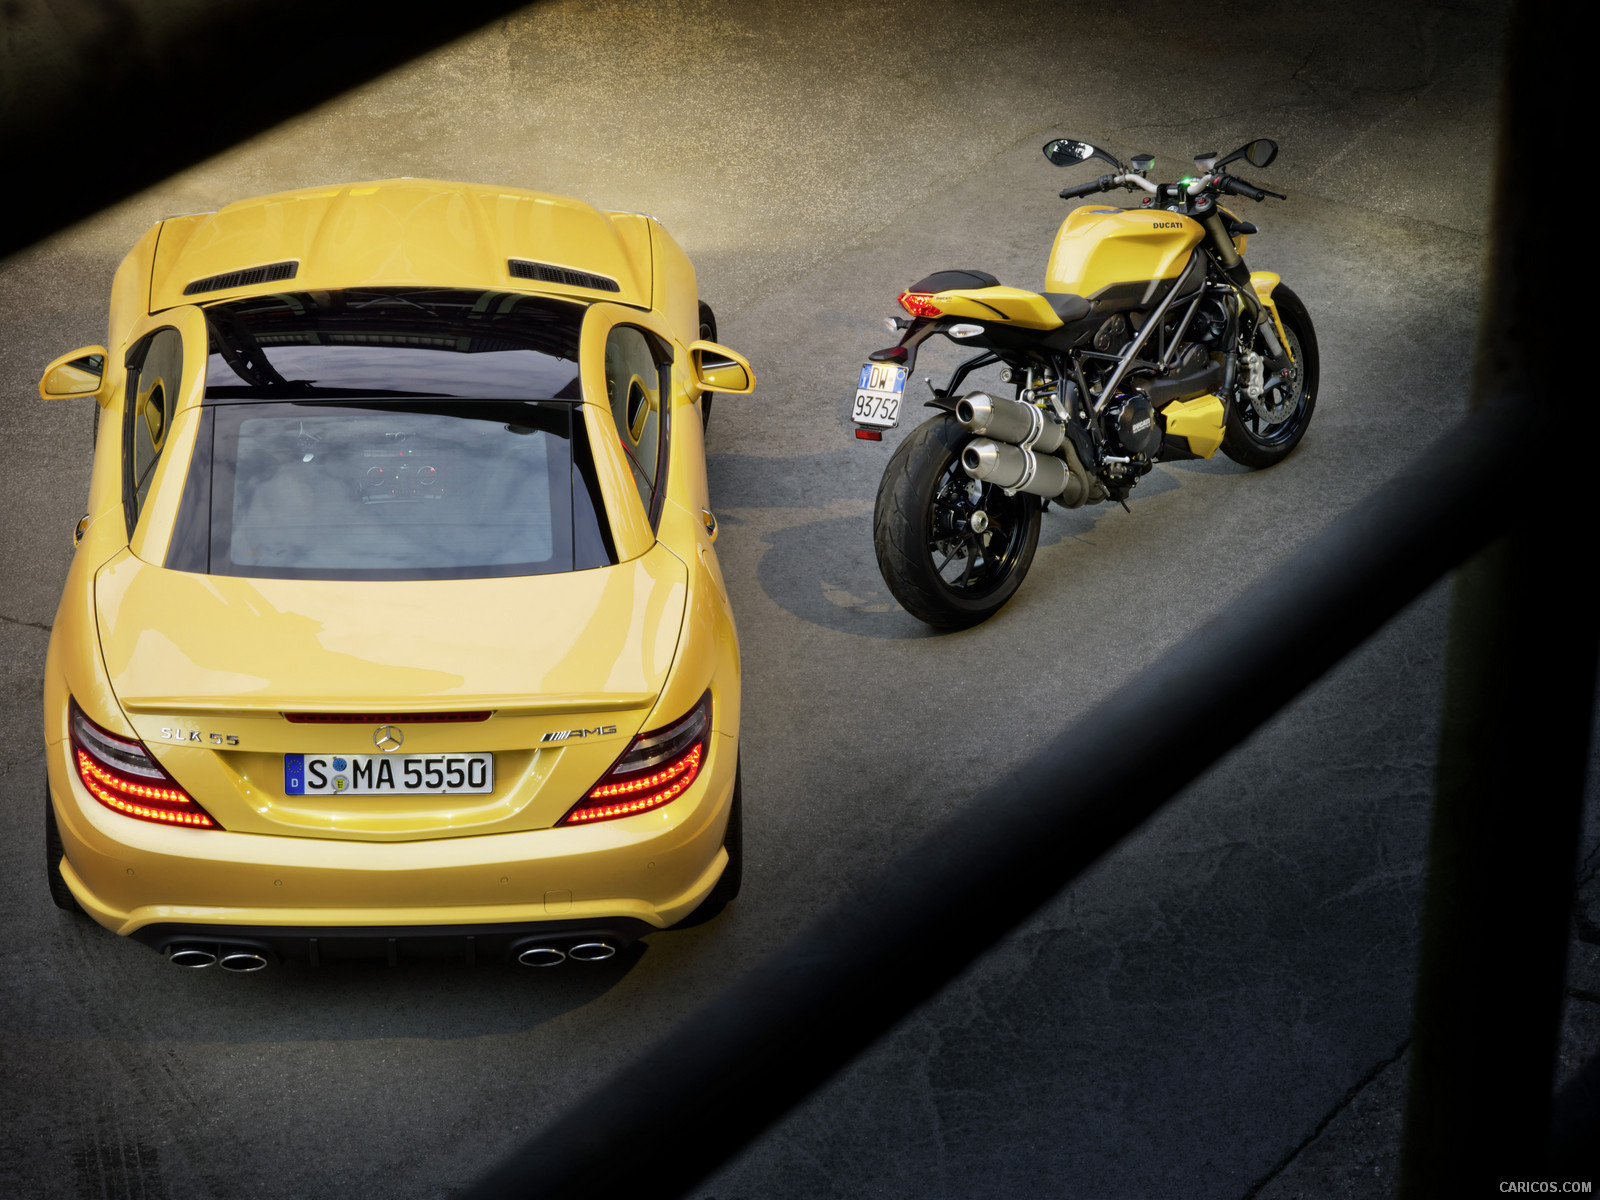 Mercedes-Benz SLK 55 AMG and Ducati Streetfighter 848 - , #39 of 47